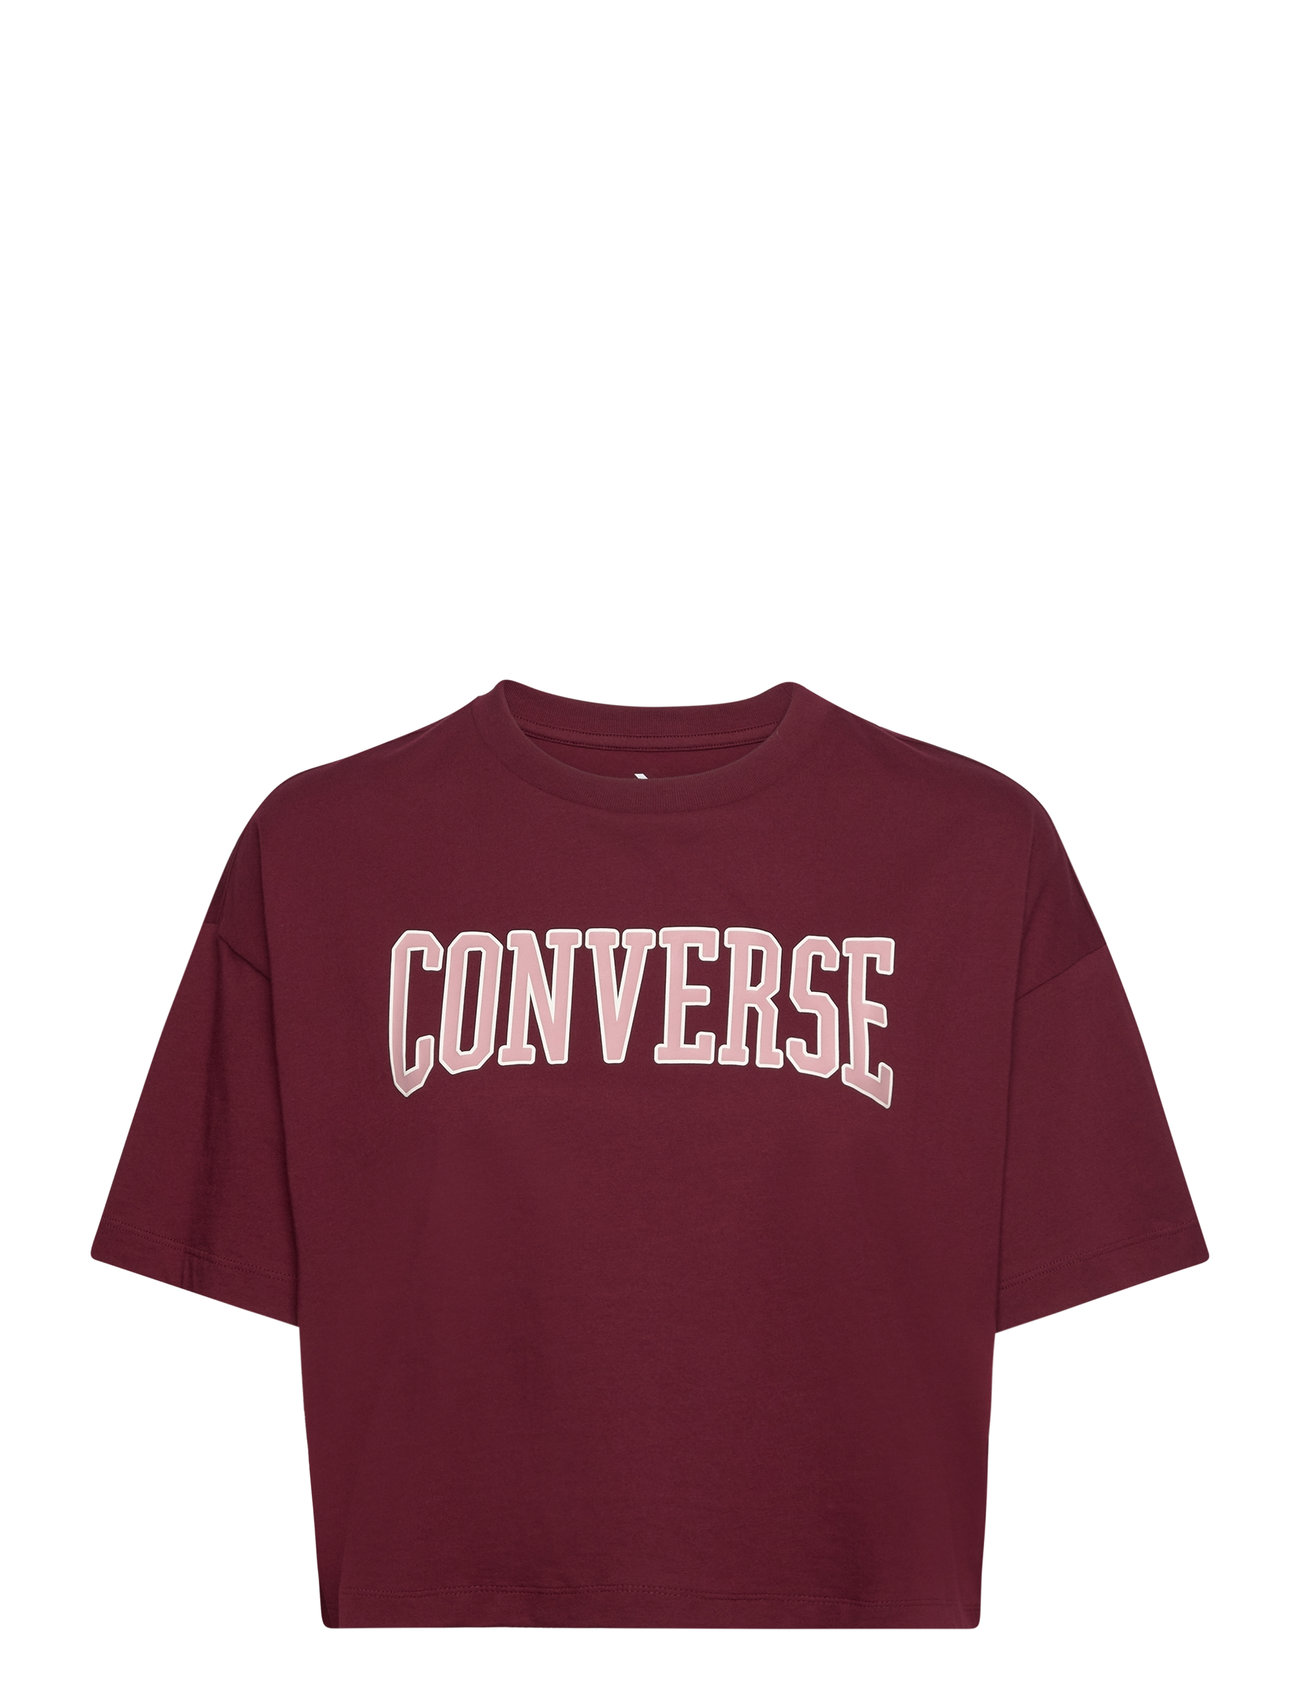 Converse Boxy Tee Sport T-shirts & Tops Short-sleeved Red Converse